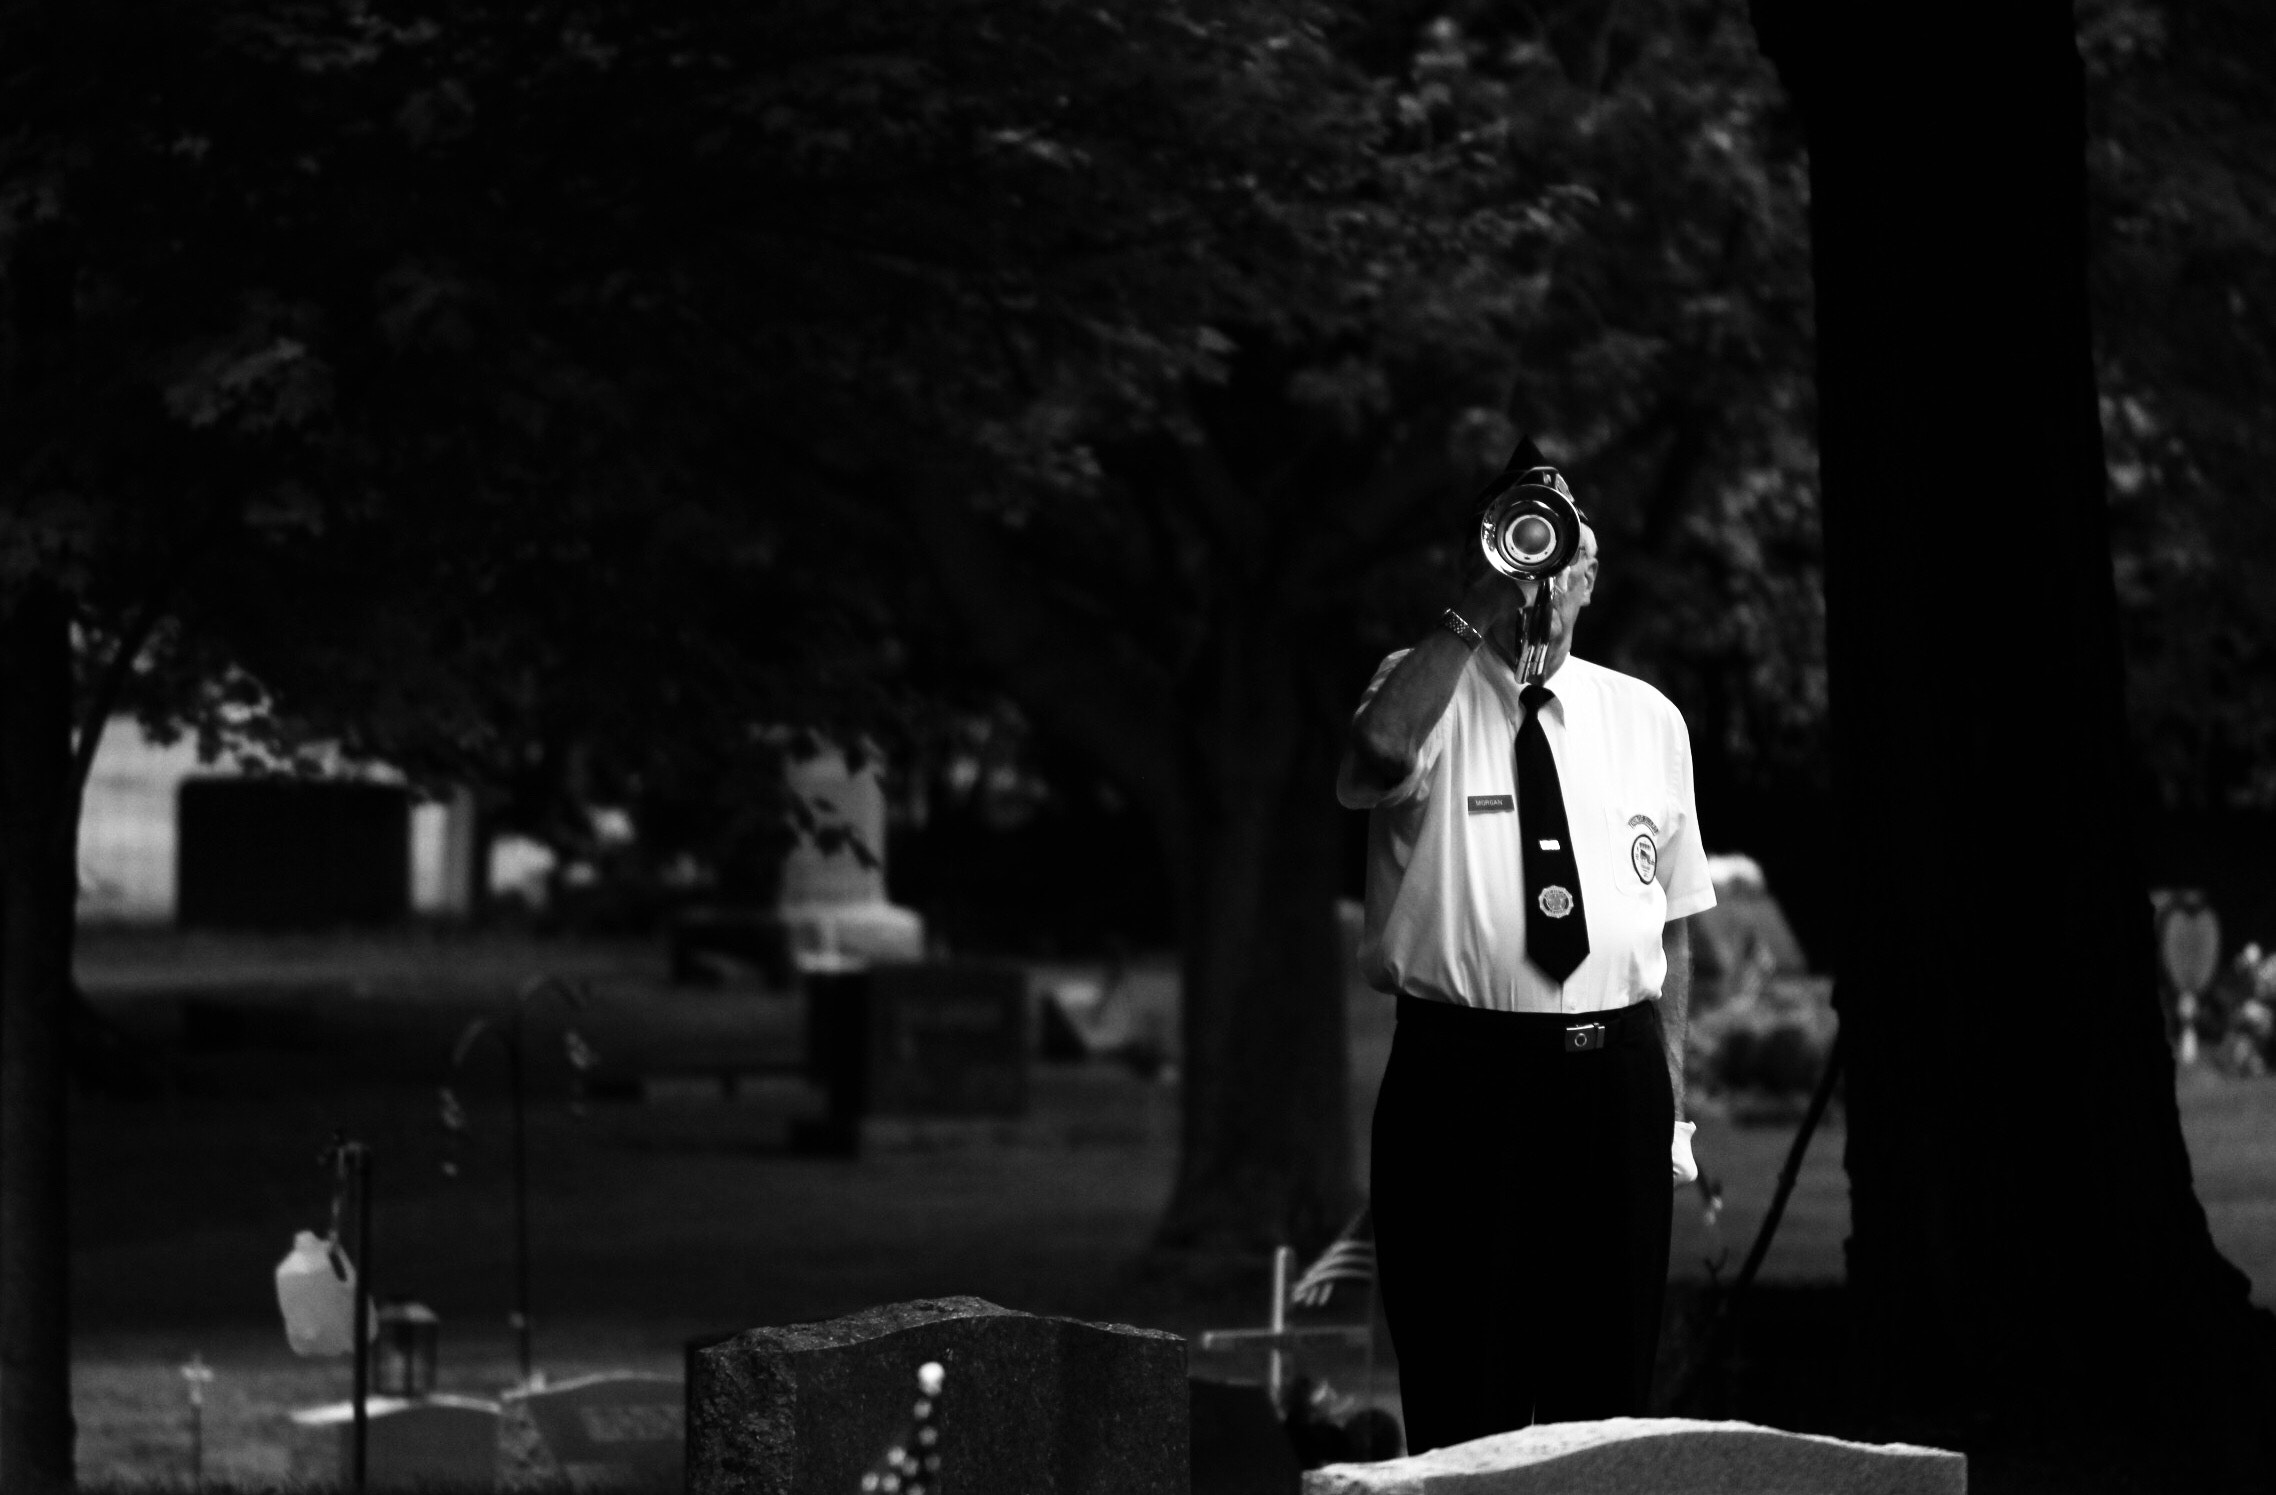 When Sorrow Comes at Christmas is embodied in this black and white photo of a man playing taps on a trumpet in a cemetery at a funeral.